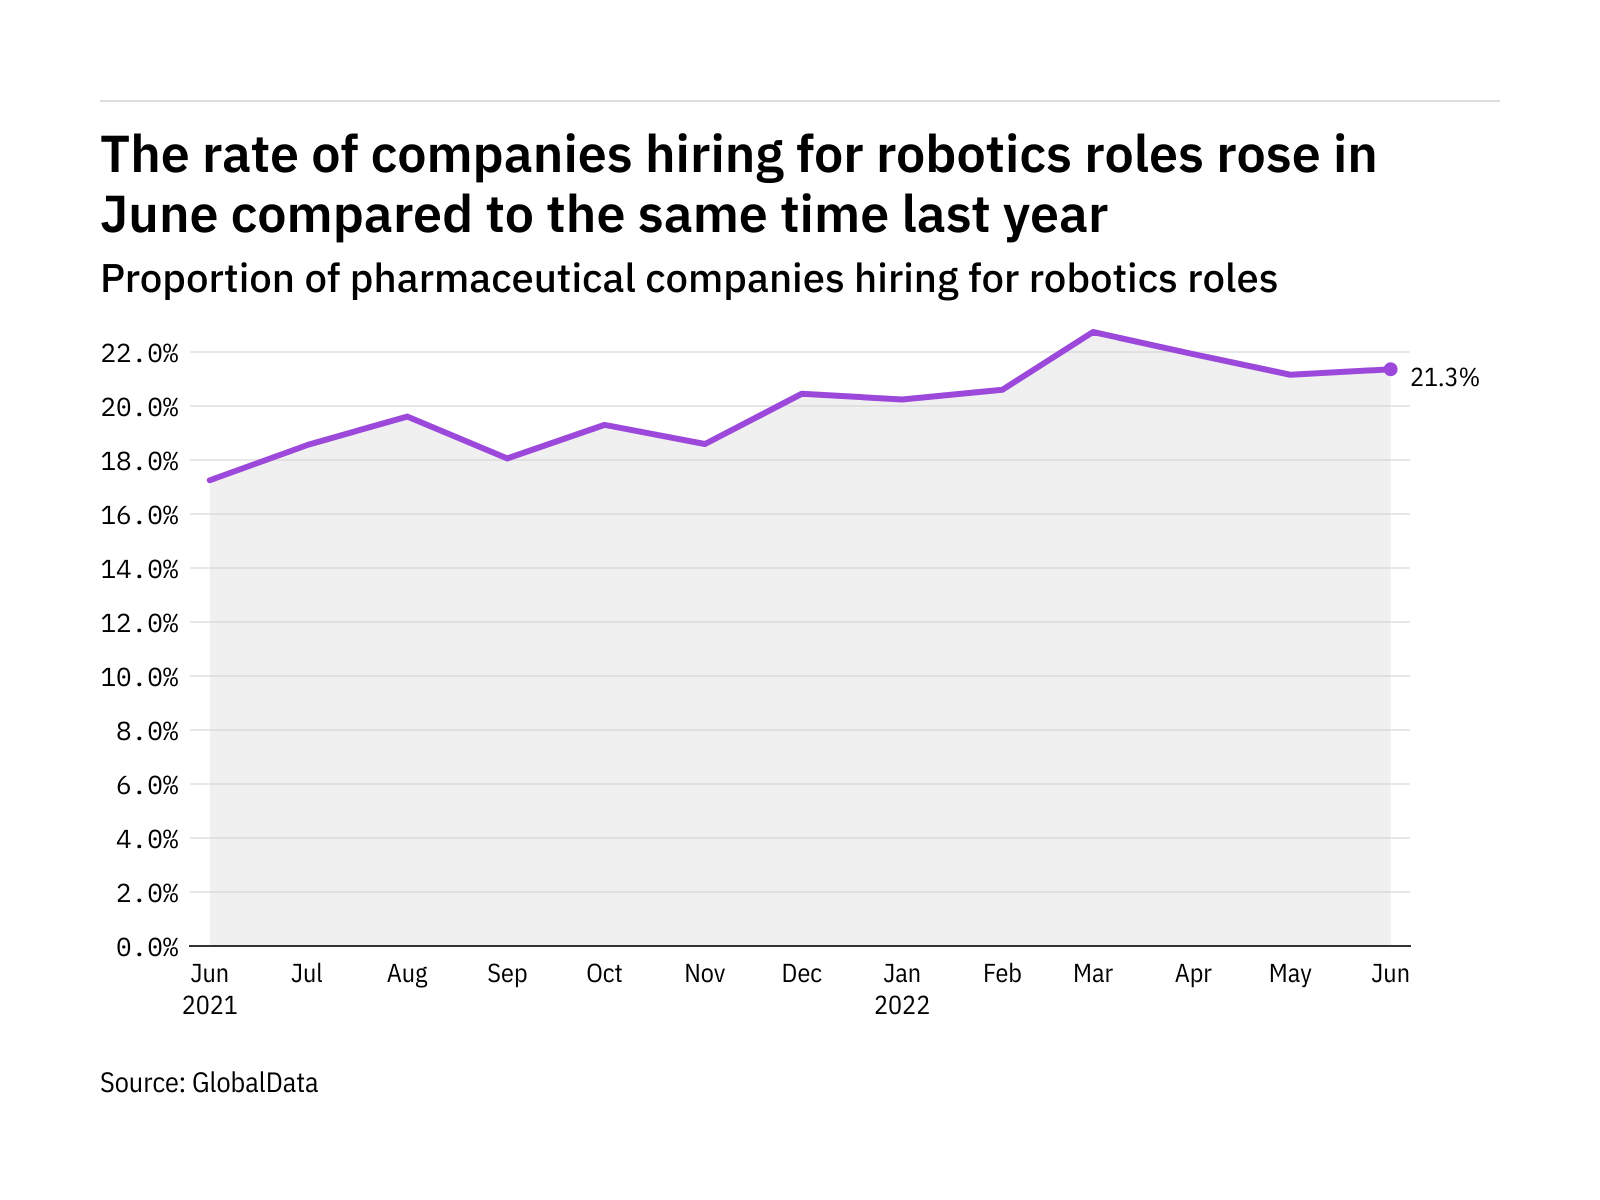 Robotics hiring levels in the pharmaceutical industry rose in June 2022